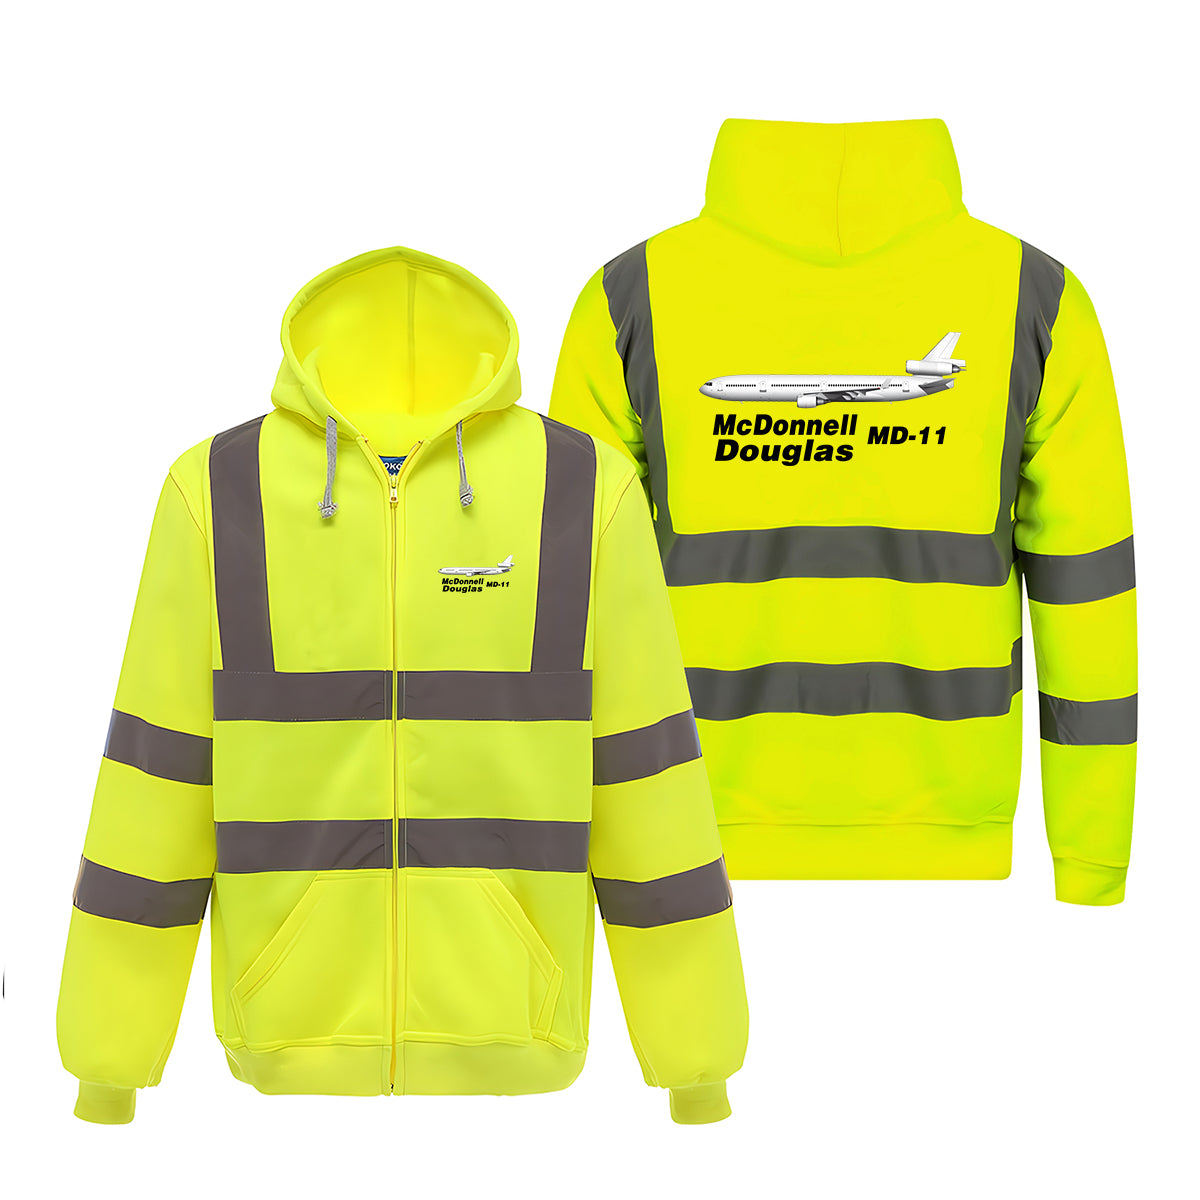 The McDonnell Douglas MD-11 Designed Reflective Zipped Hoodies